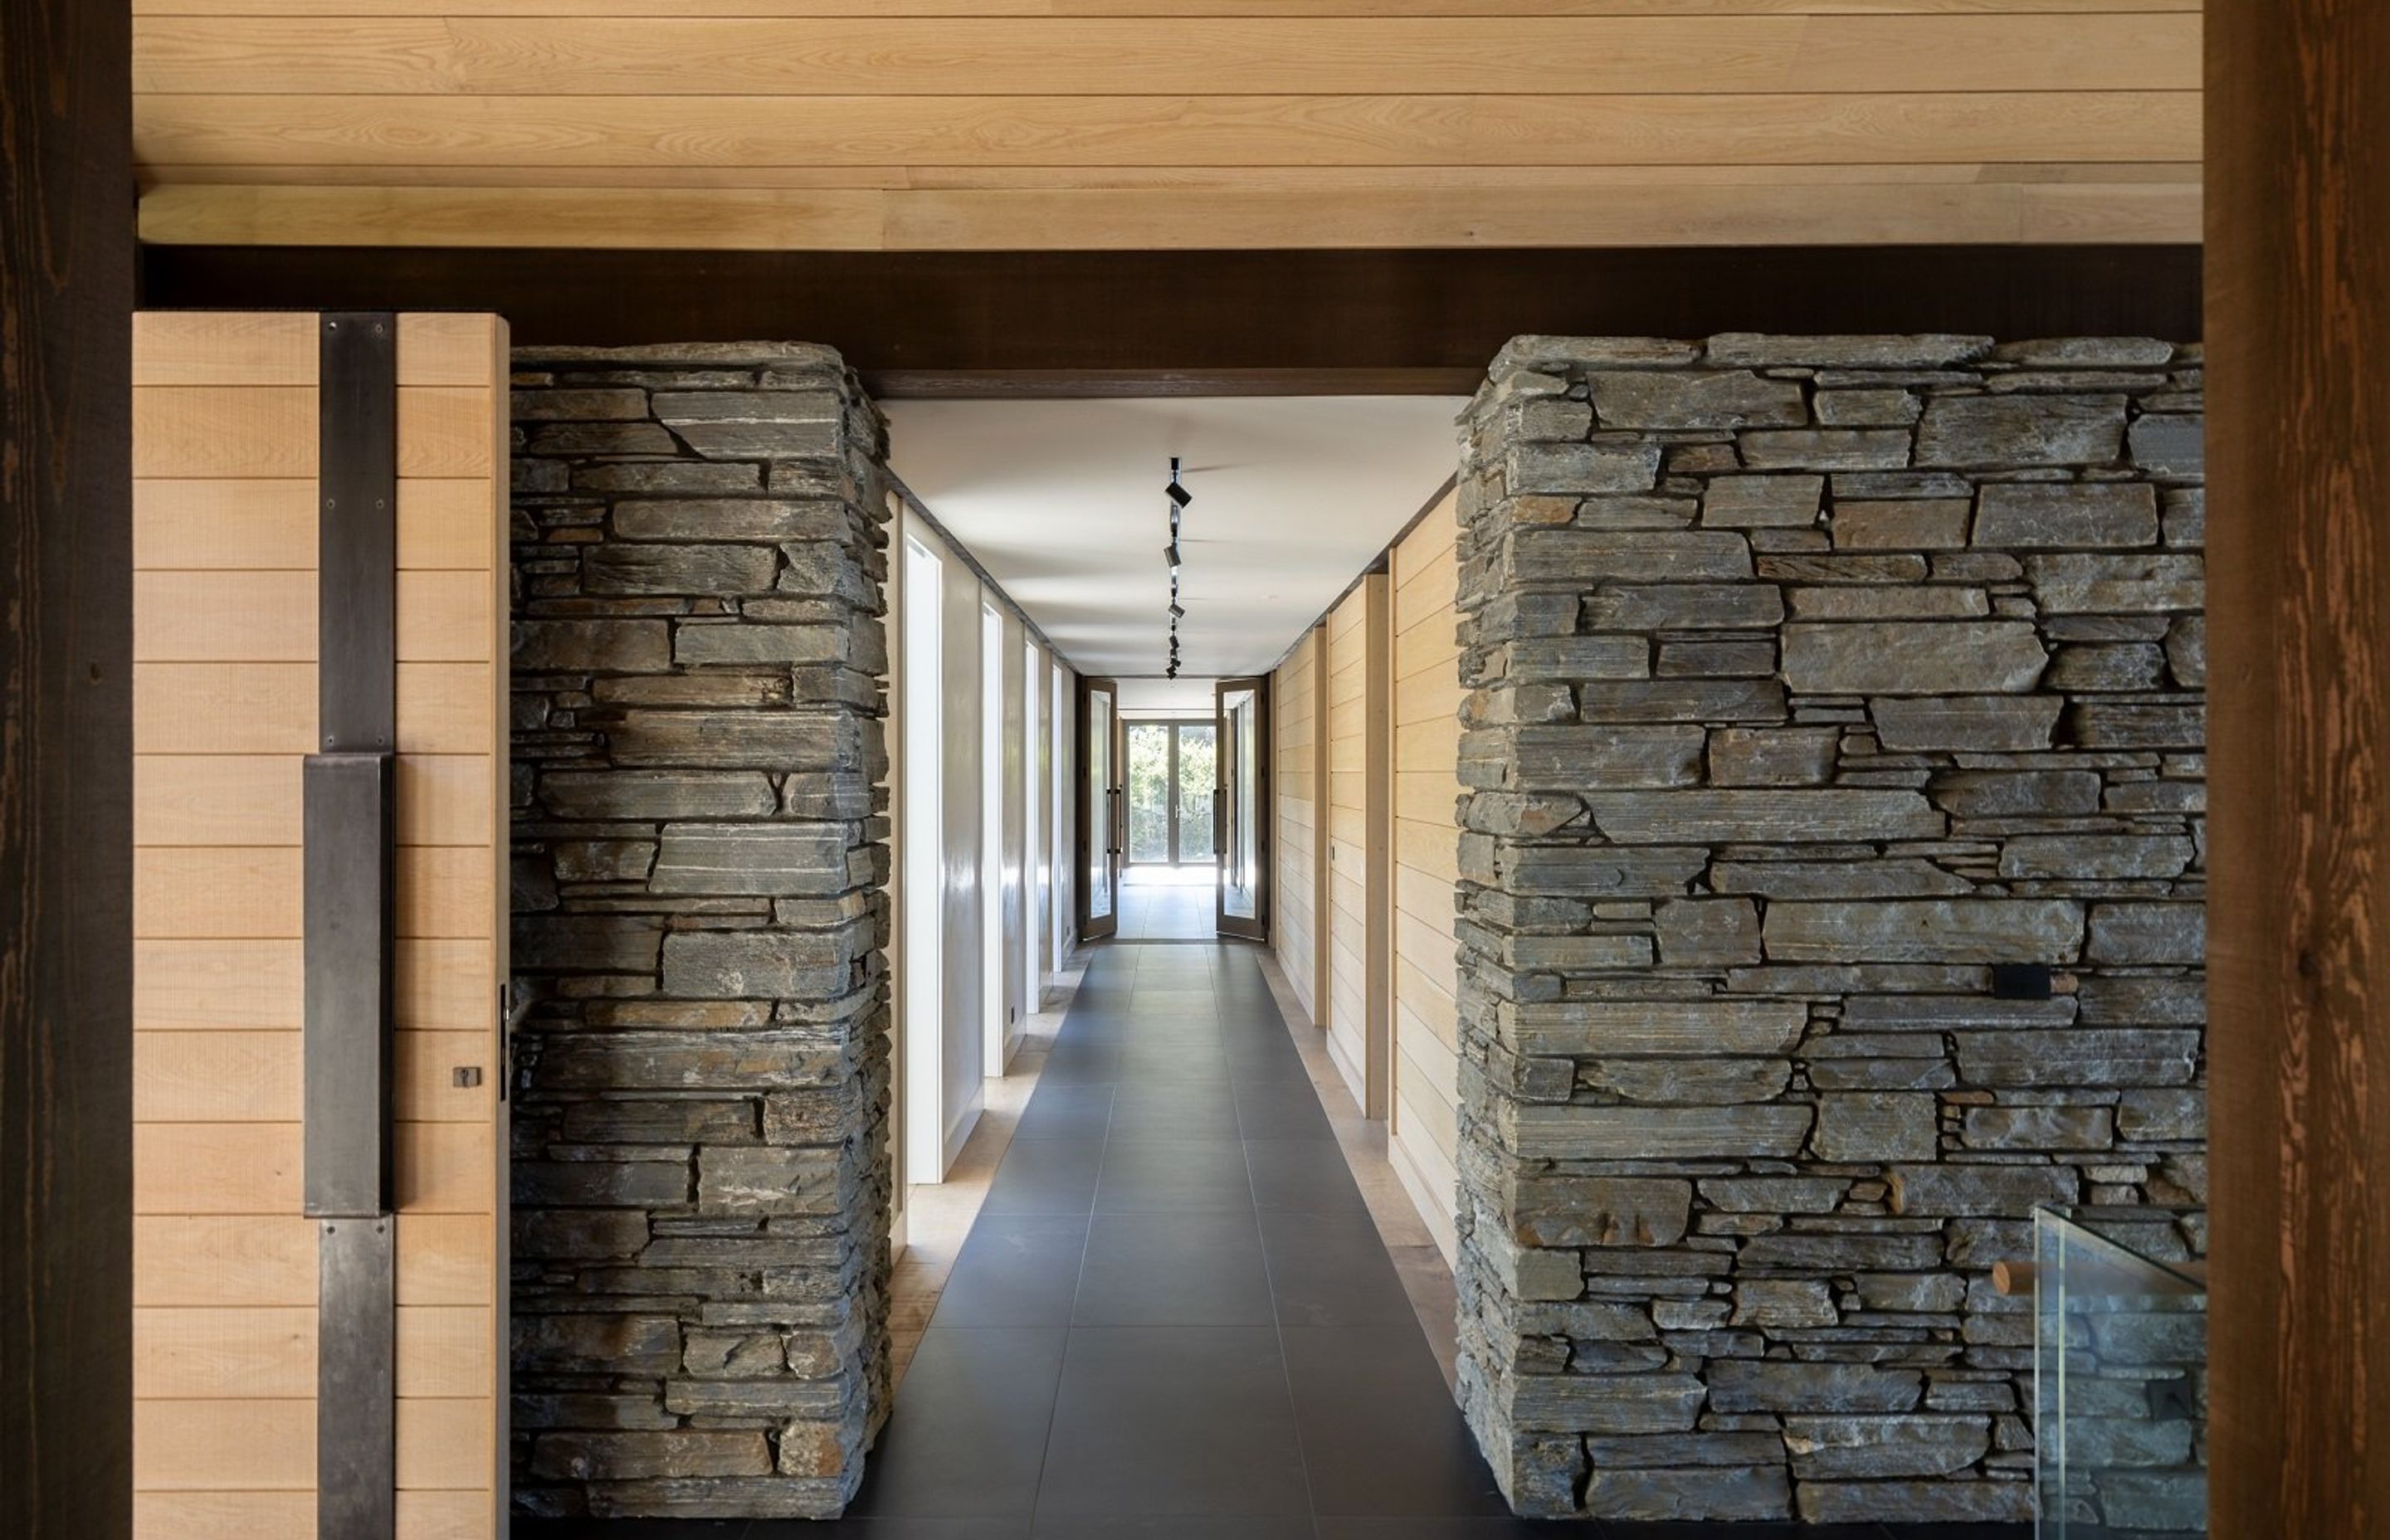 On both sides of the entry, a schist-clad wall anchors the home, with hallways leading to the bedrooms on the left, and living spaces on the right.